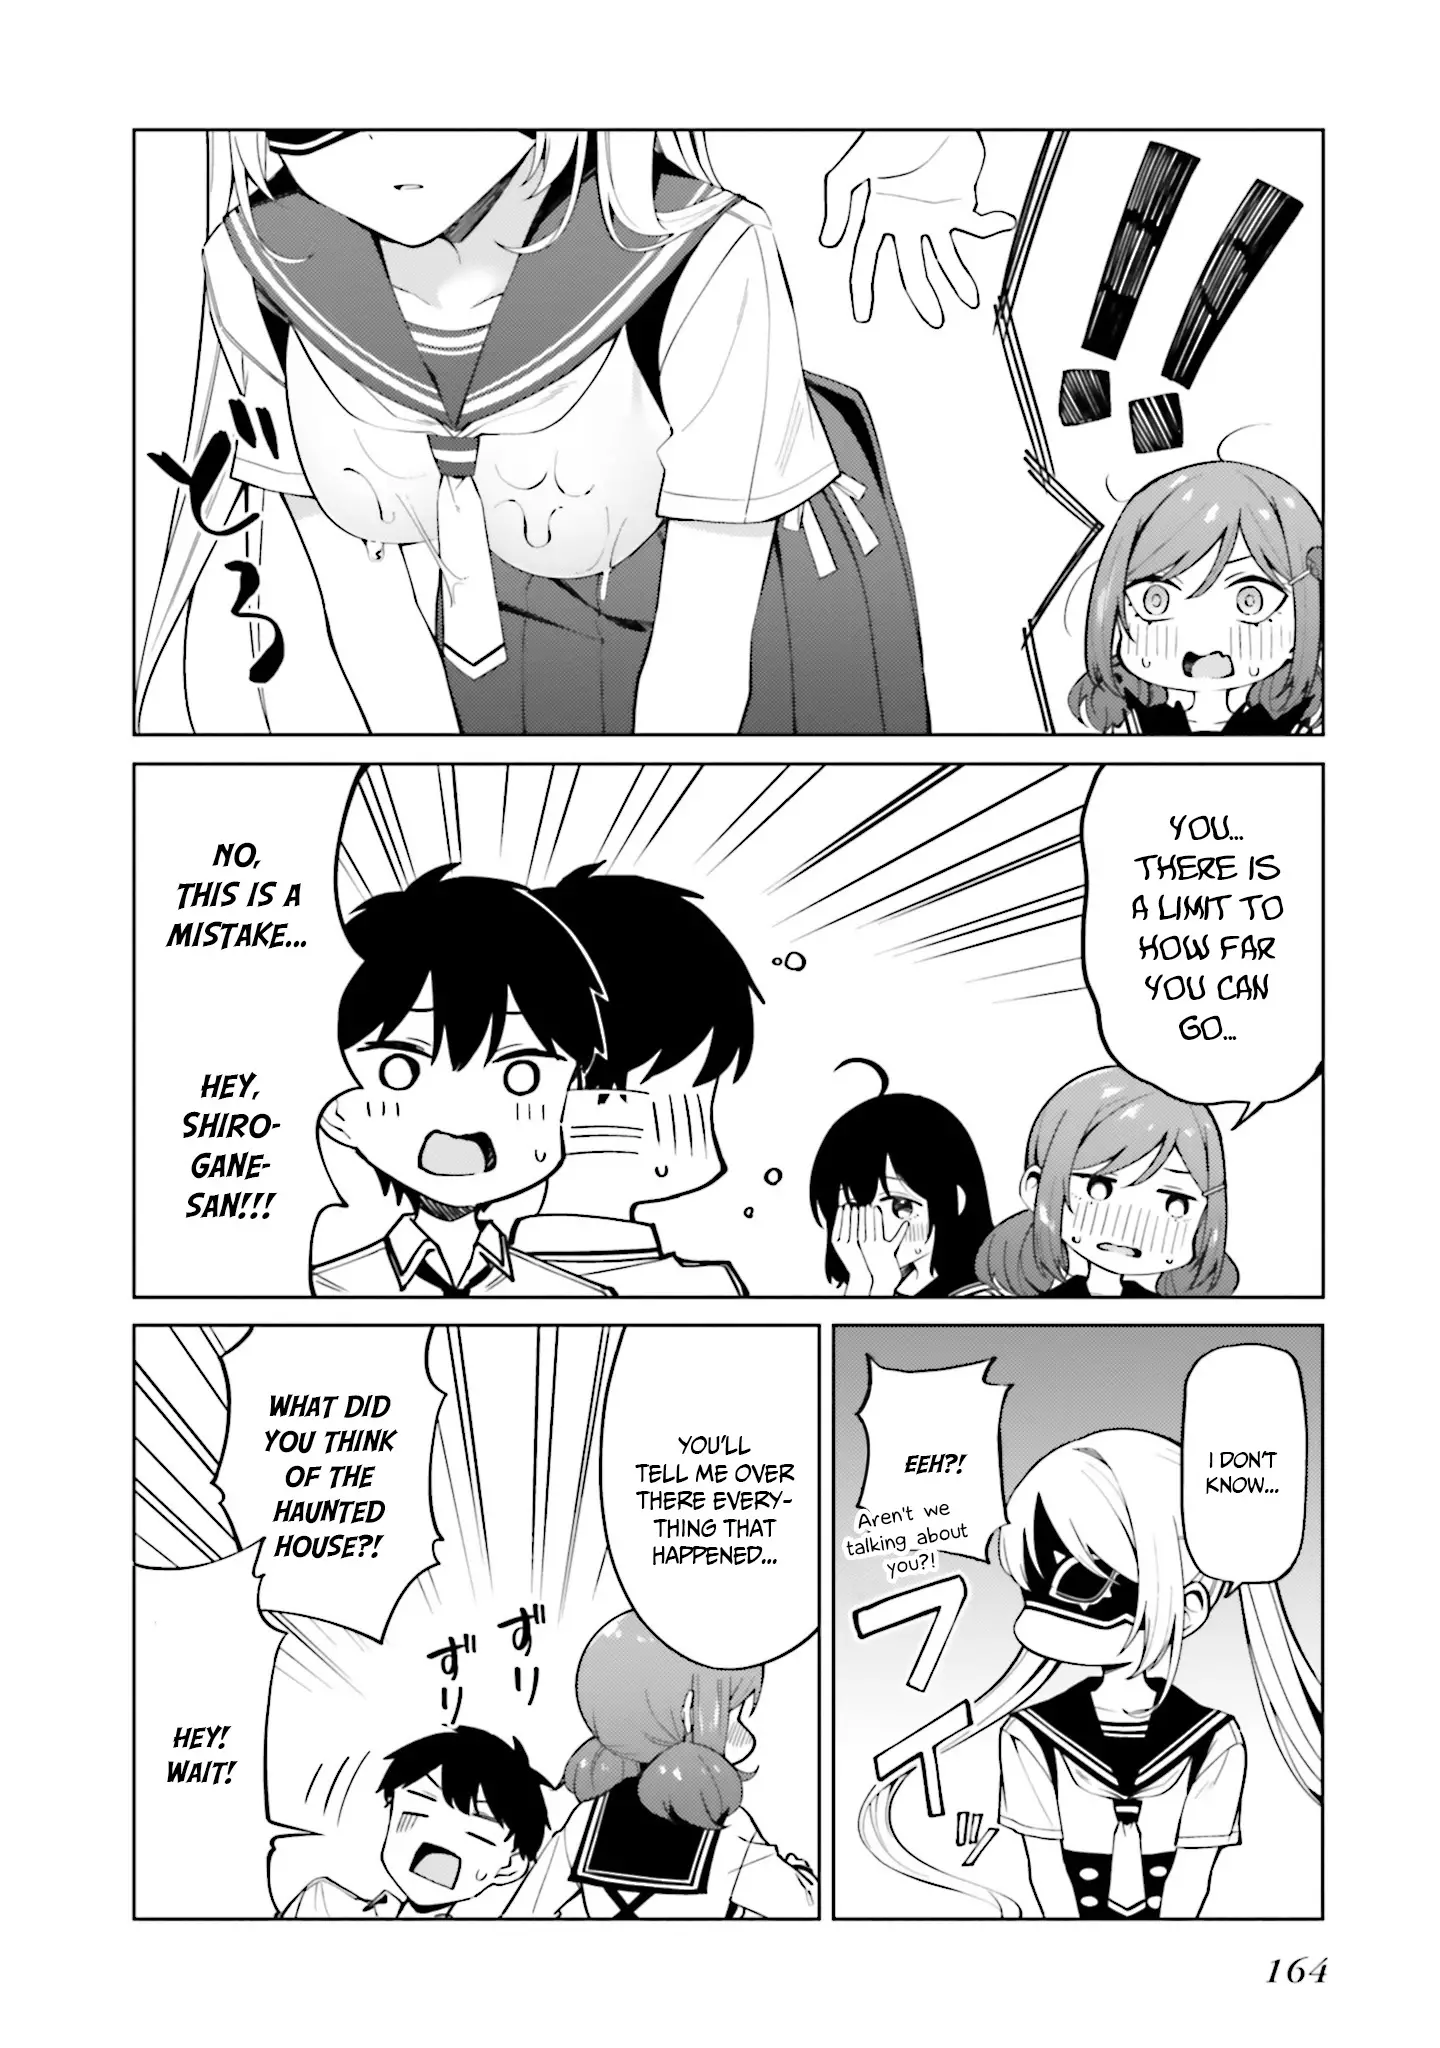 I Don't Understand Shirogane-San's Facial Expression At All - 12 page 25-692b8e6e